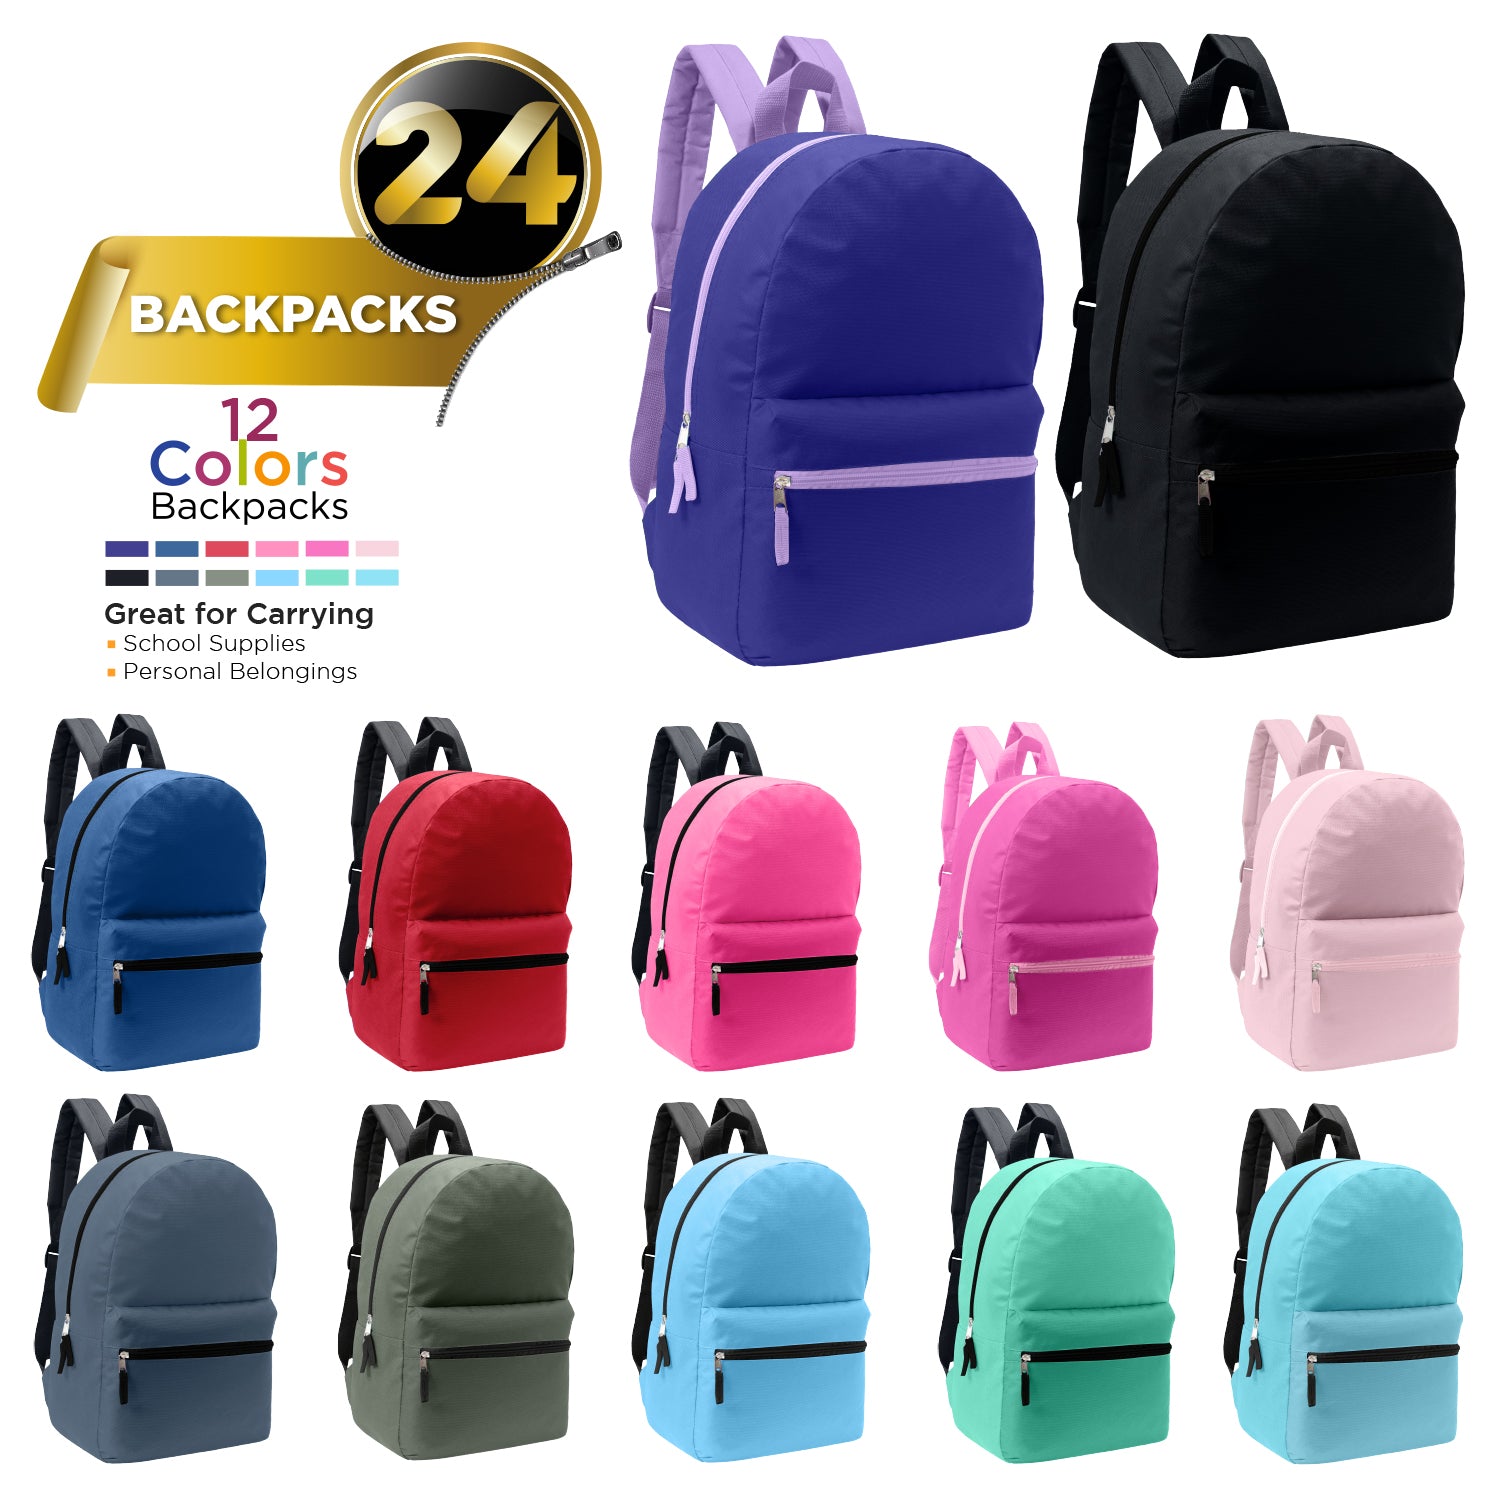 bulk backpacks under $5 with free shipping